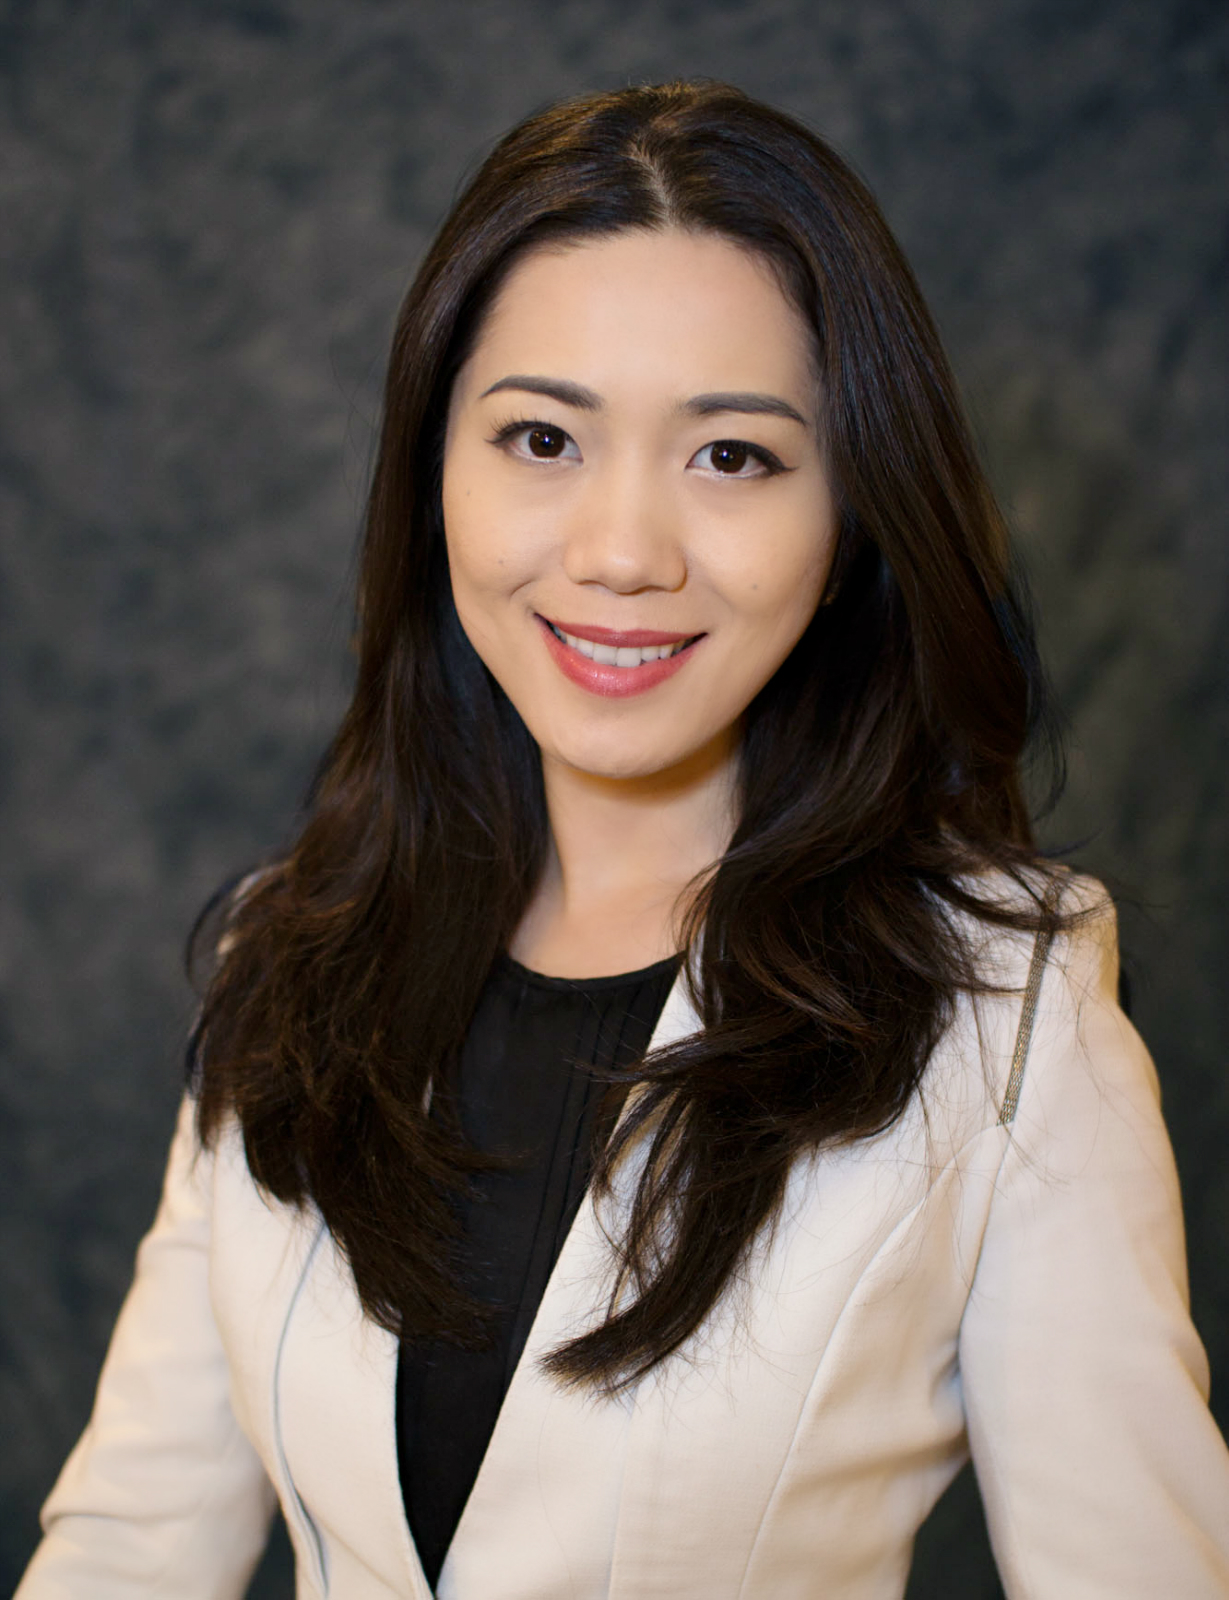 Dr. Rachel Rui, Director of Marketing and Communications